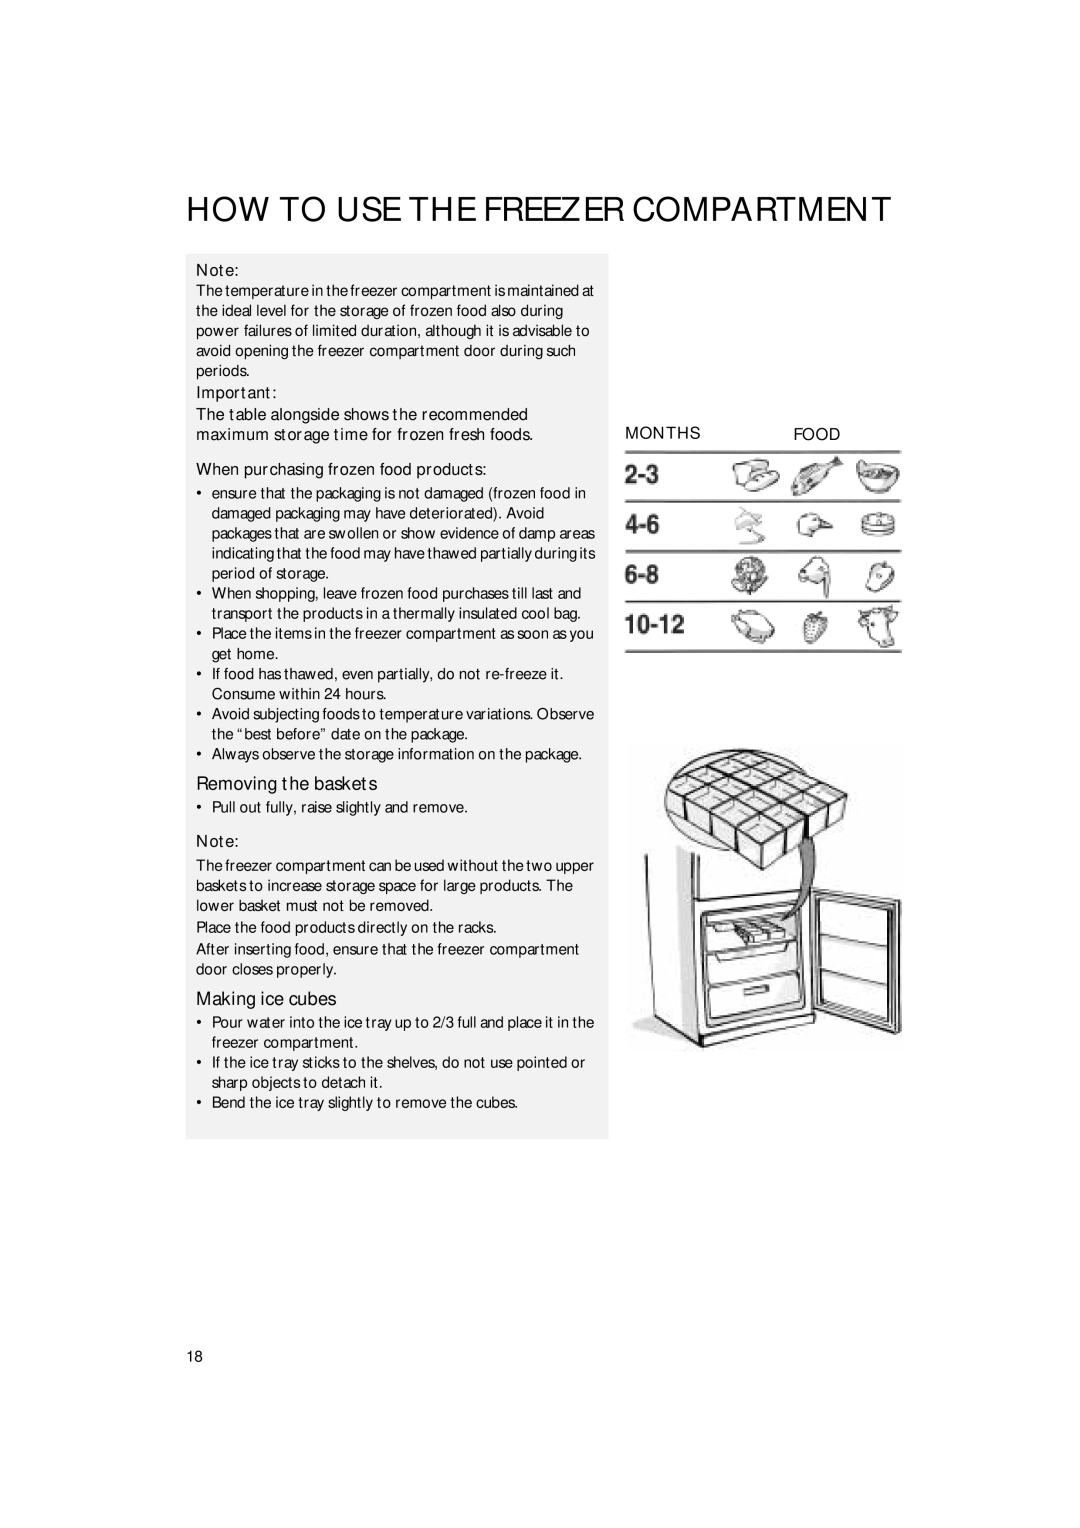 Smeg CR5050A manual Removing the baskets, Making ice cubes, How To Use The Freezer Compartment, periods, Months, Food 